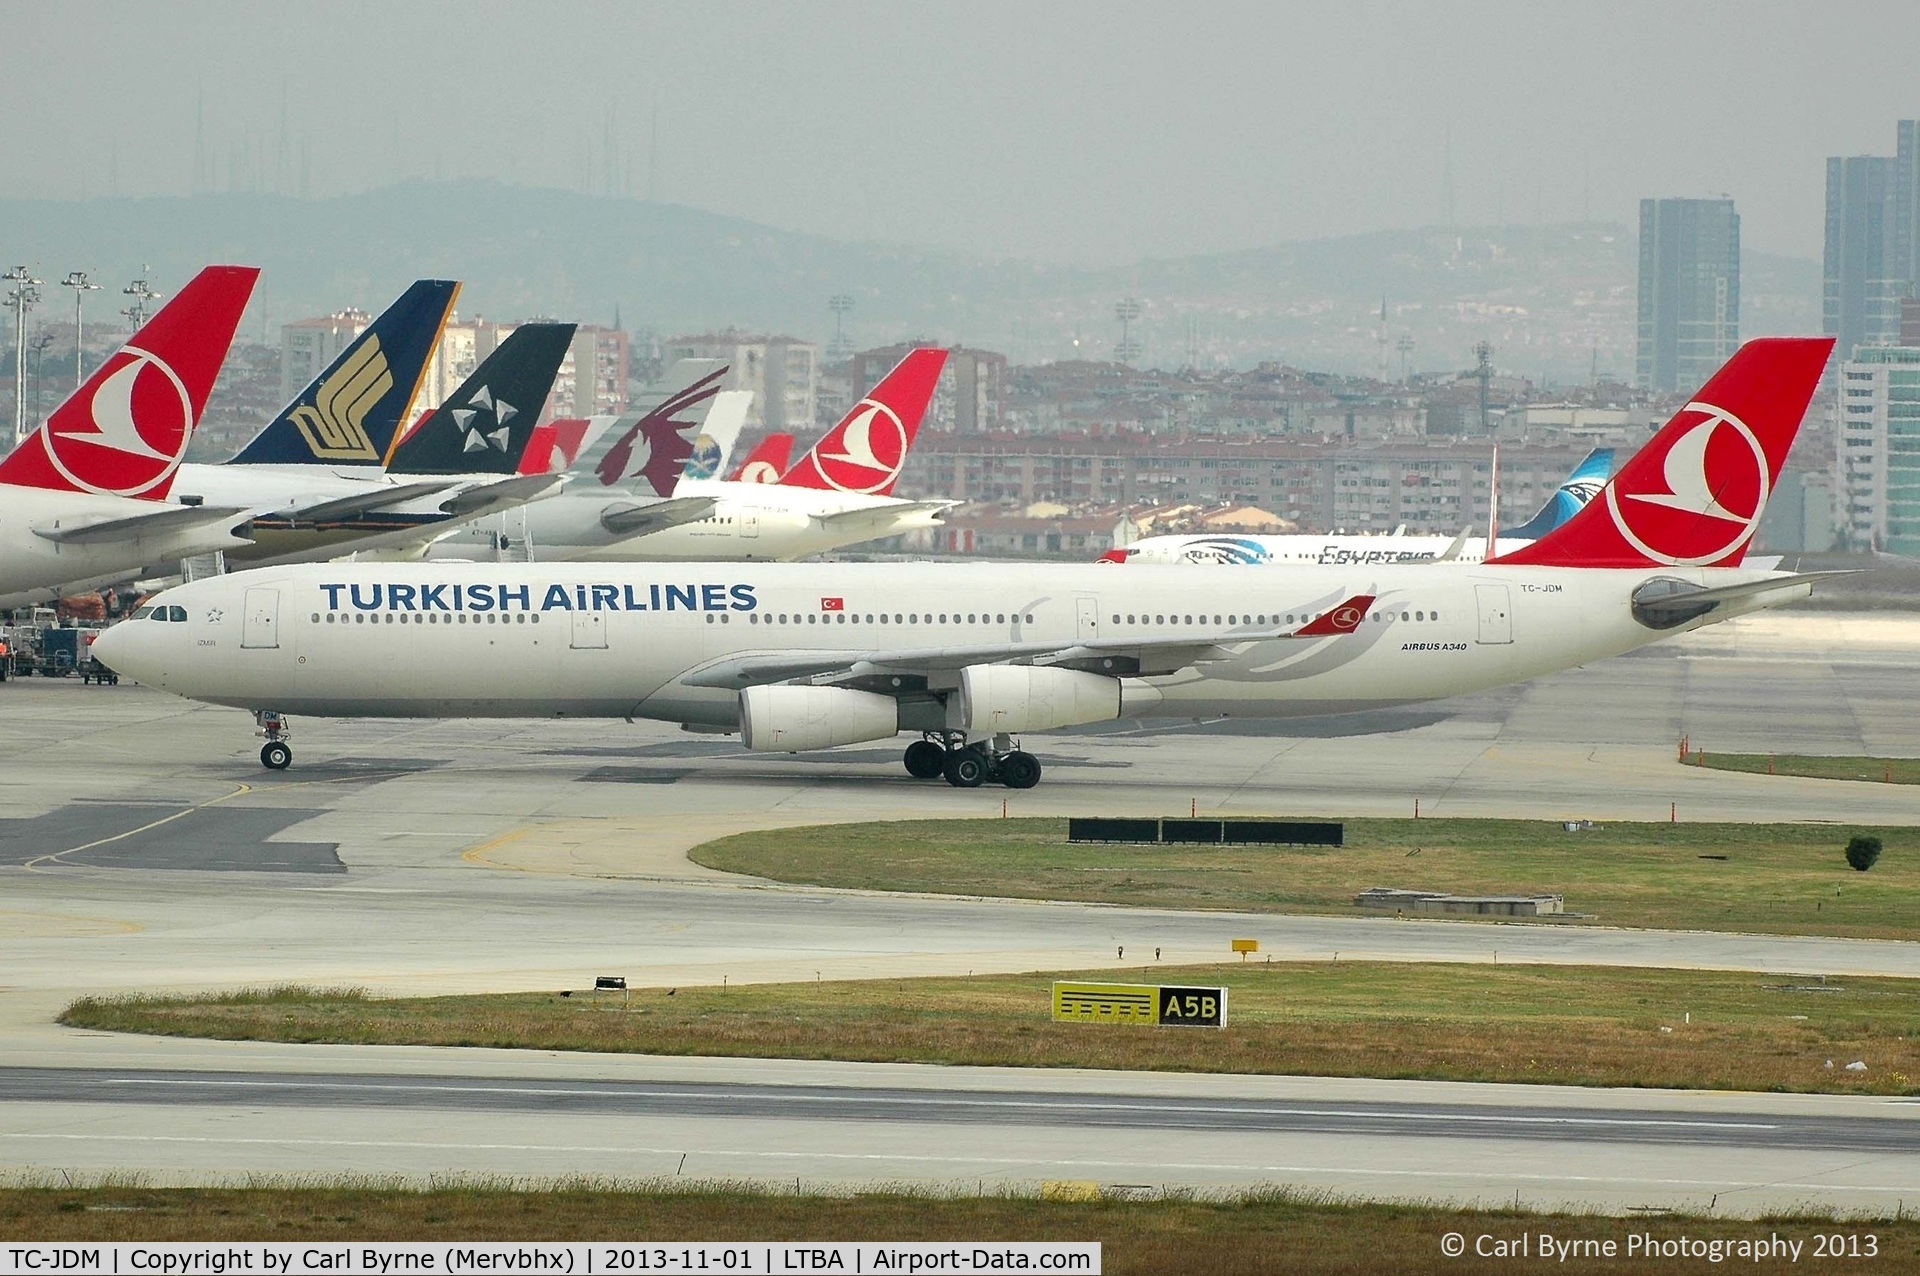 TC-JDM, 1996 Airbus A340-311 C/N 115, Taken from the Fly Inn Shopping Mall.